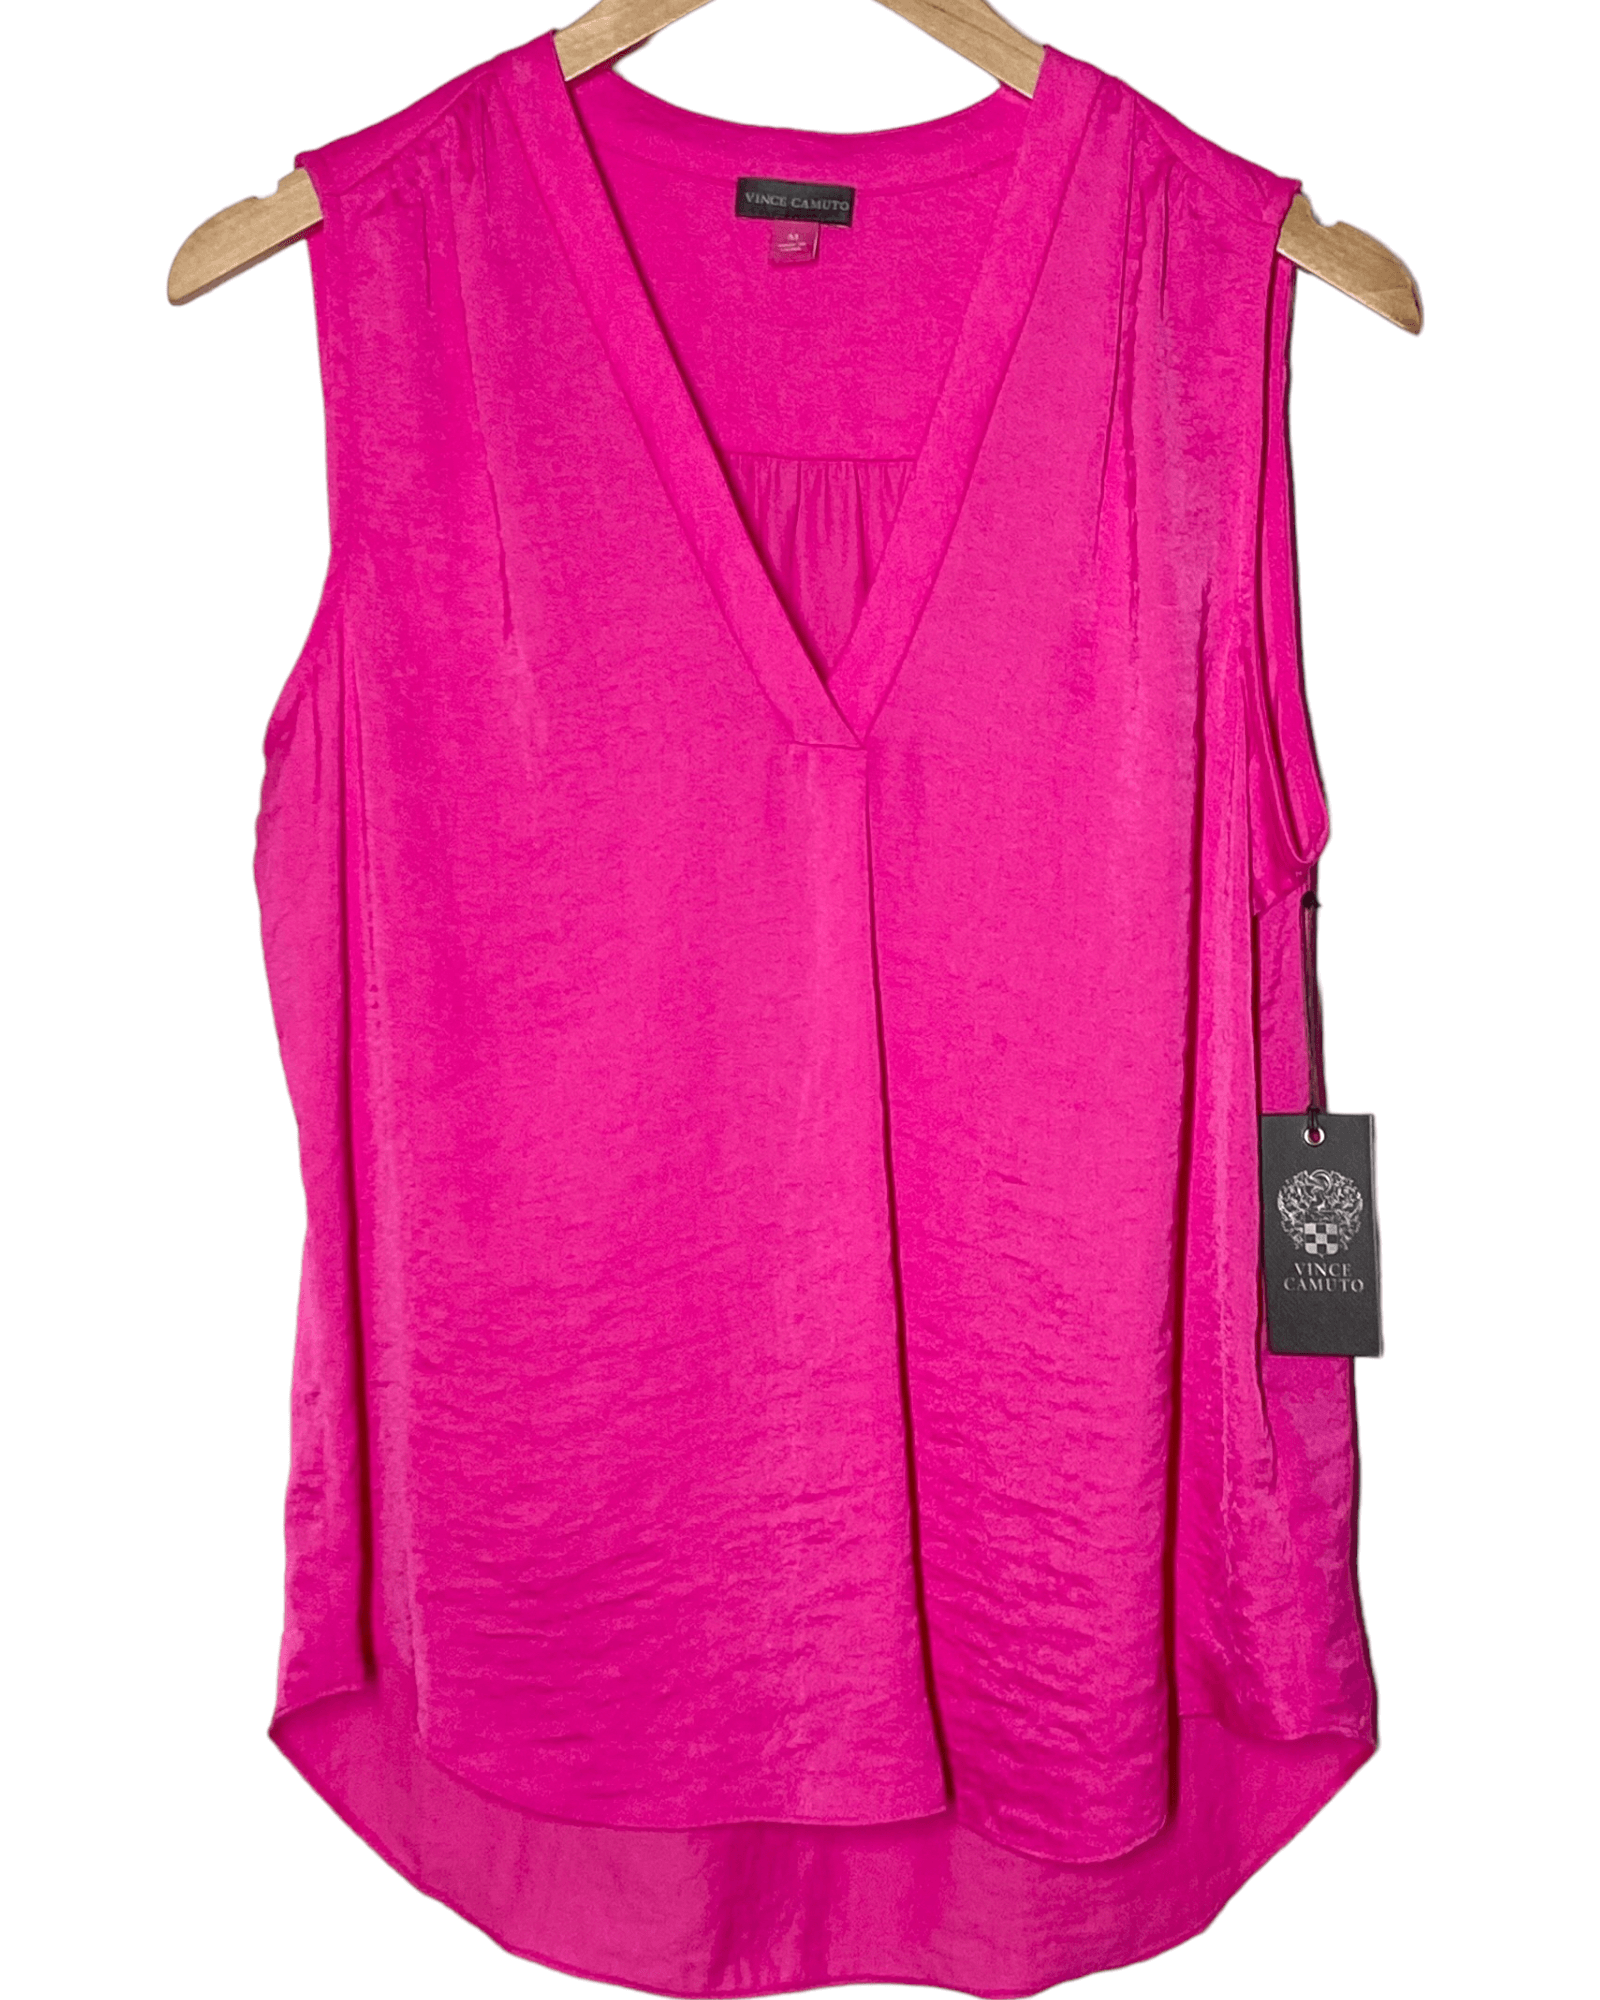 Bright Winter VINCE CAMUTO hot pink rumple satin blouse